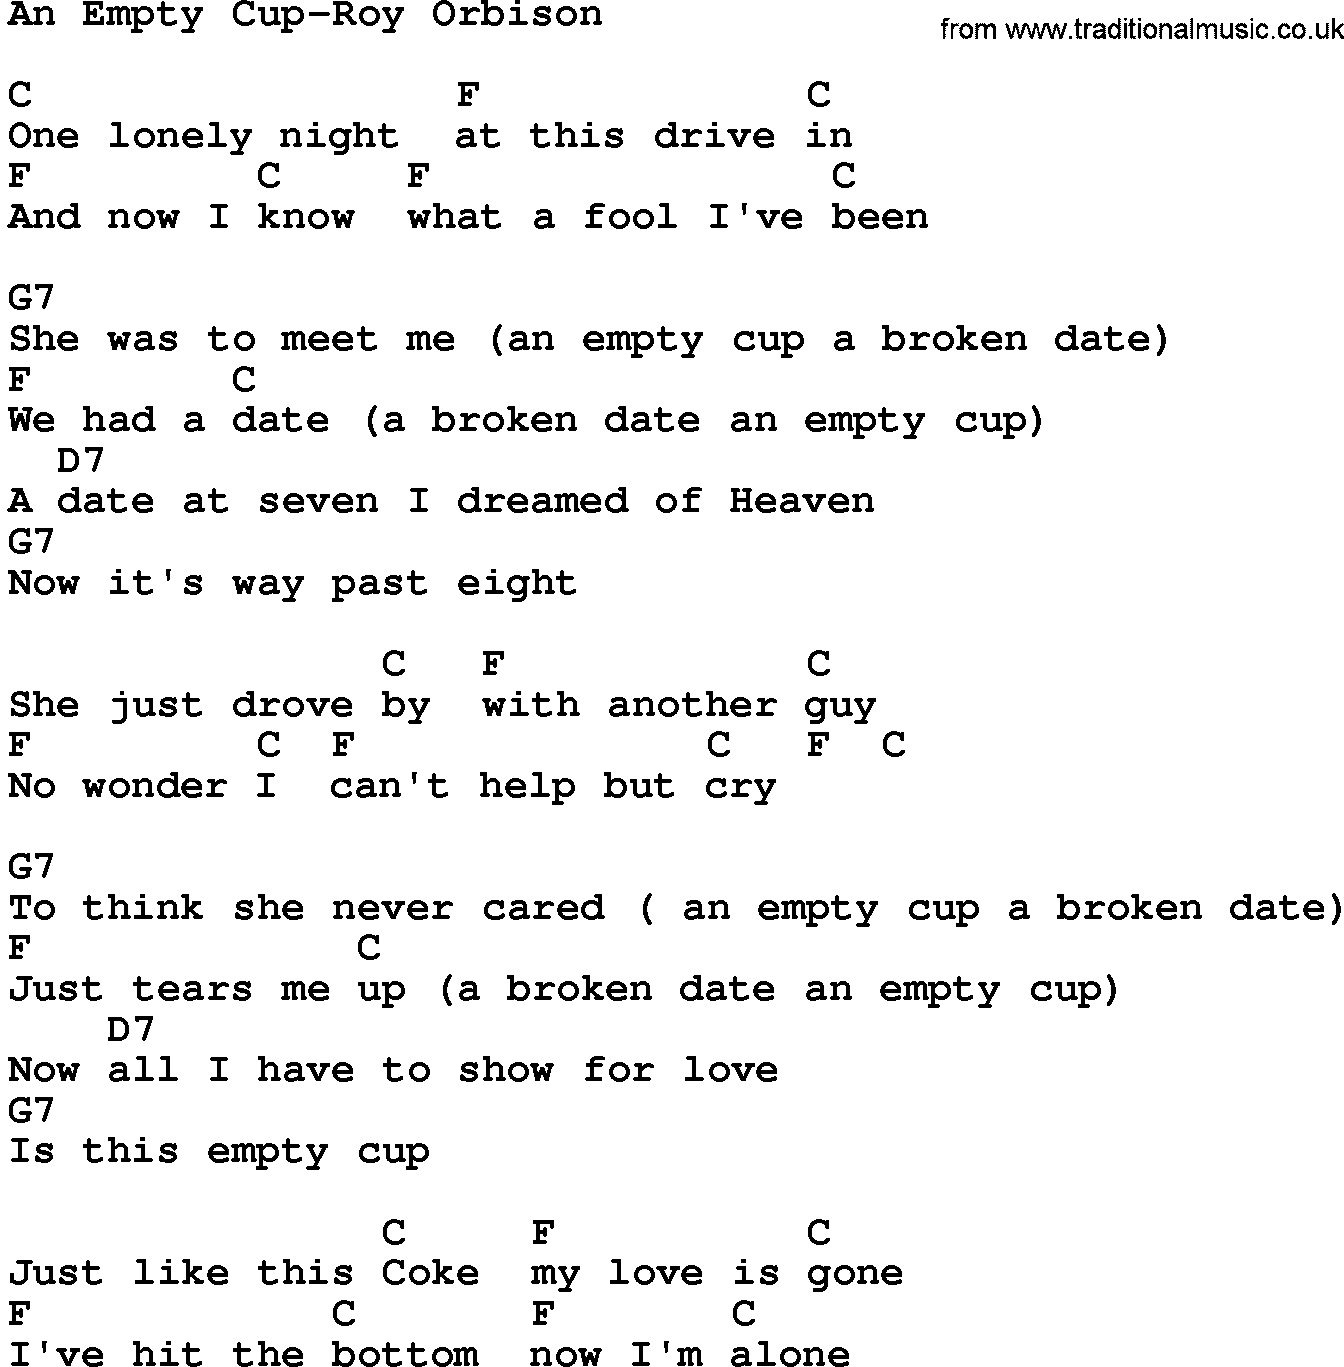 Country music song: An Empty Cup-Roy Orbison lyrics and chords